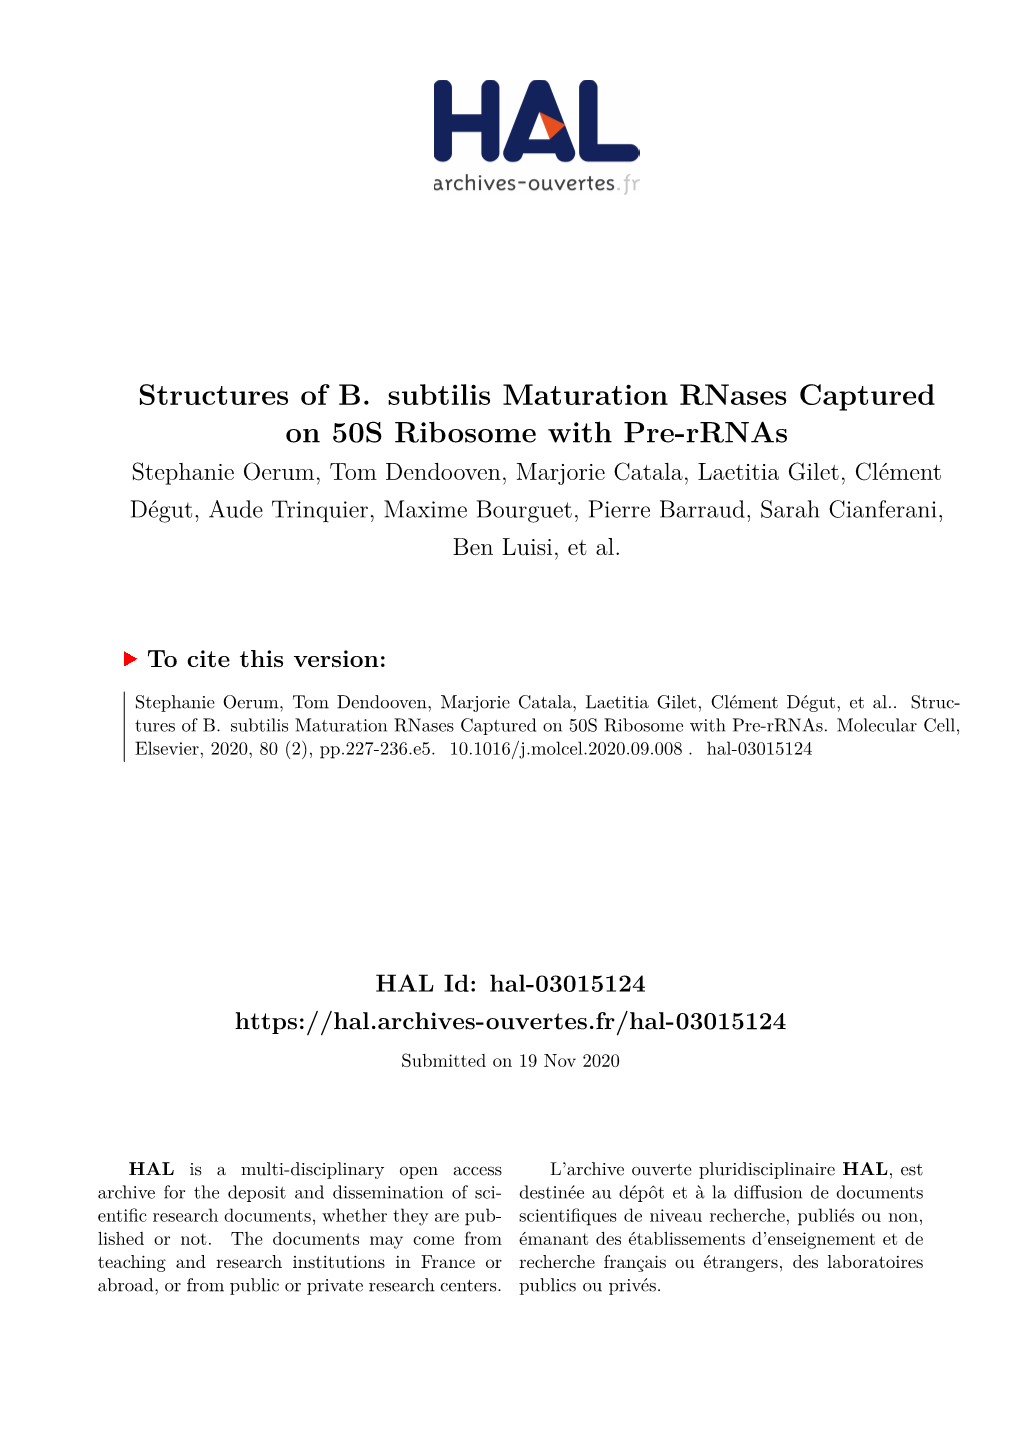 Structures of B. Subtilis Maturation Rnases Captured on 50S